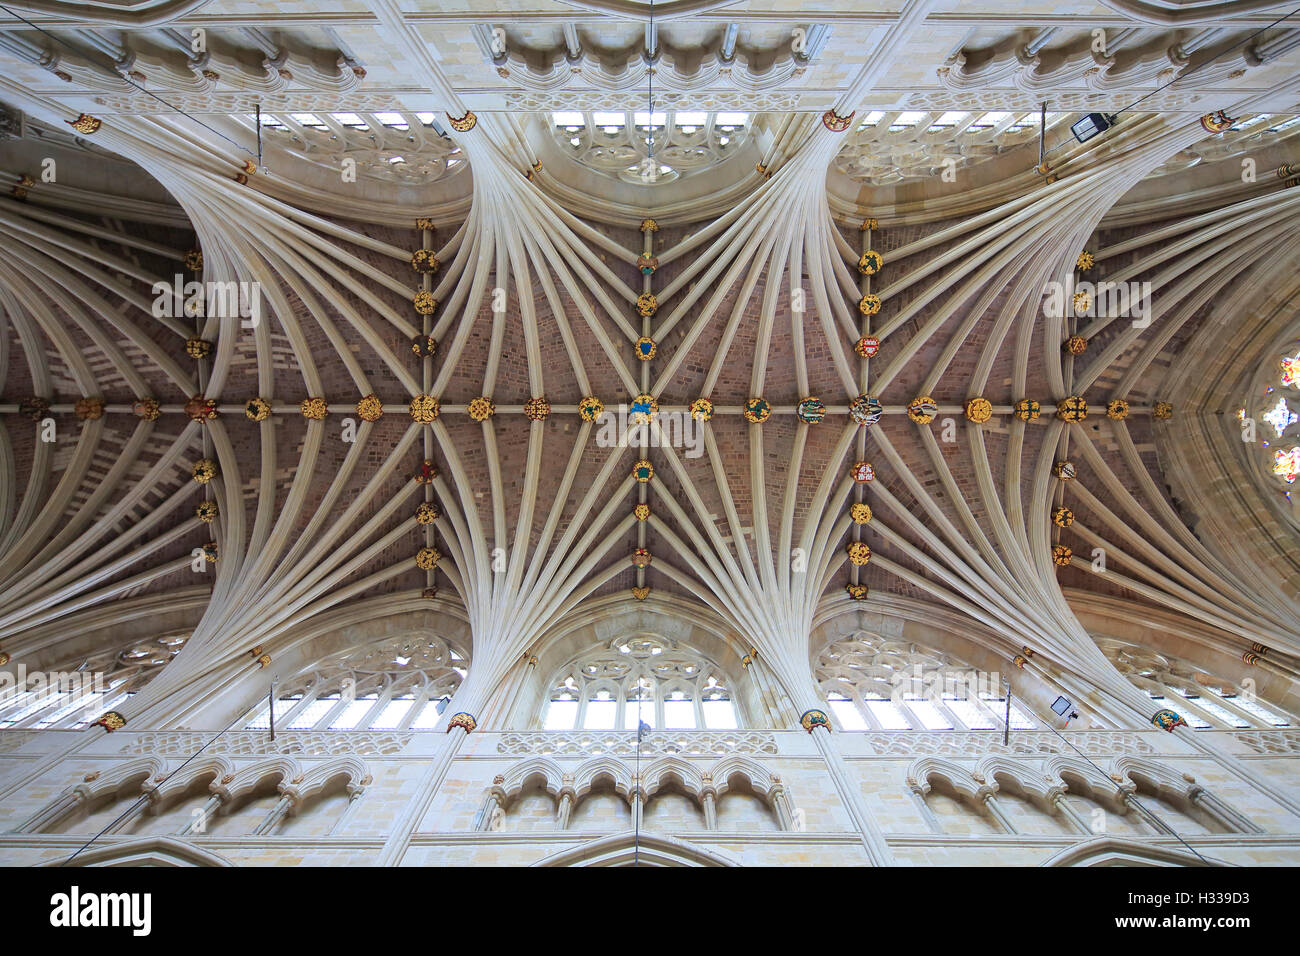 Fan vaulting, nave, The Cathedral Church of St Peter, Exeter, Devon, England, United Kingdom Stock Photo